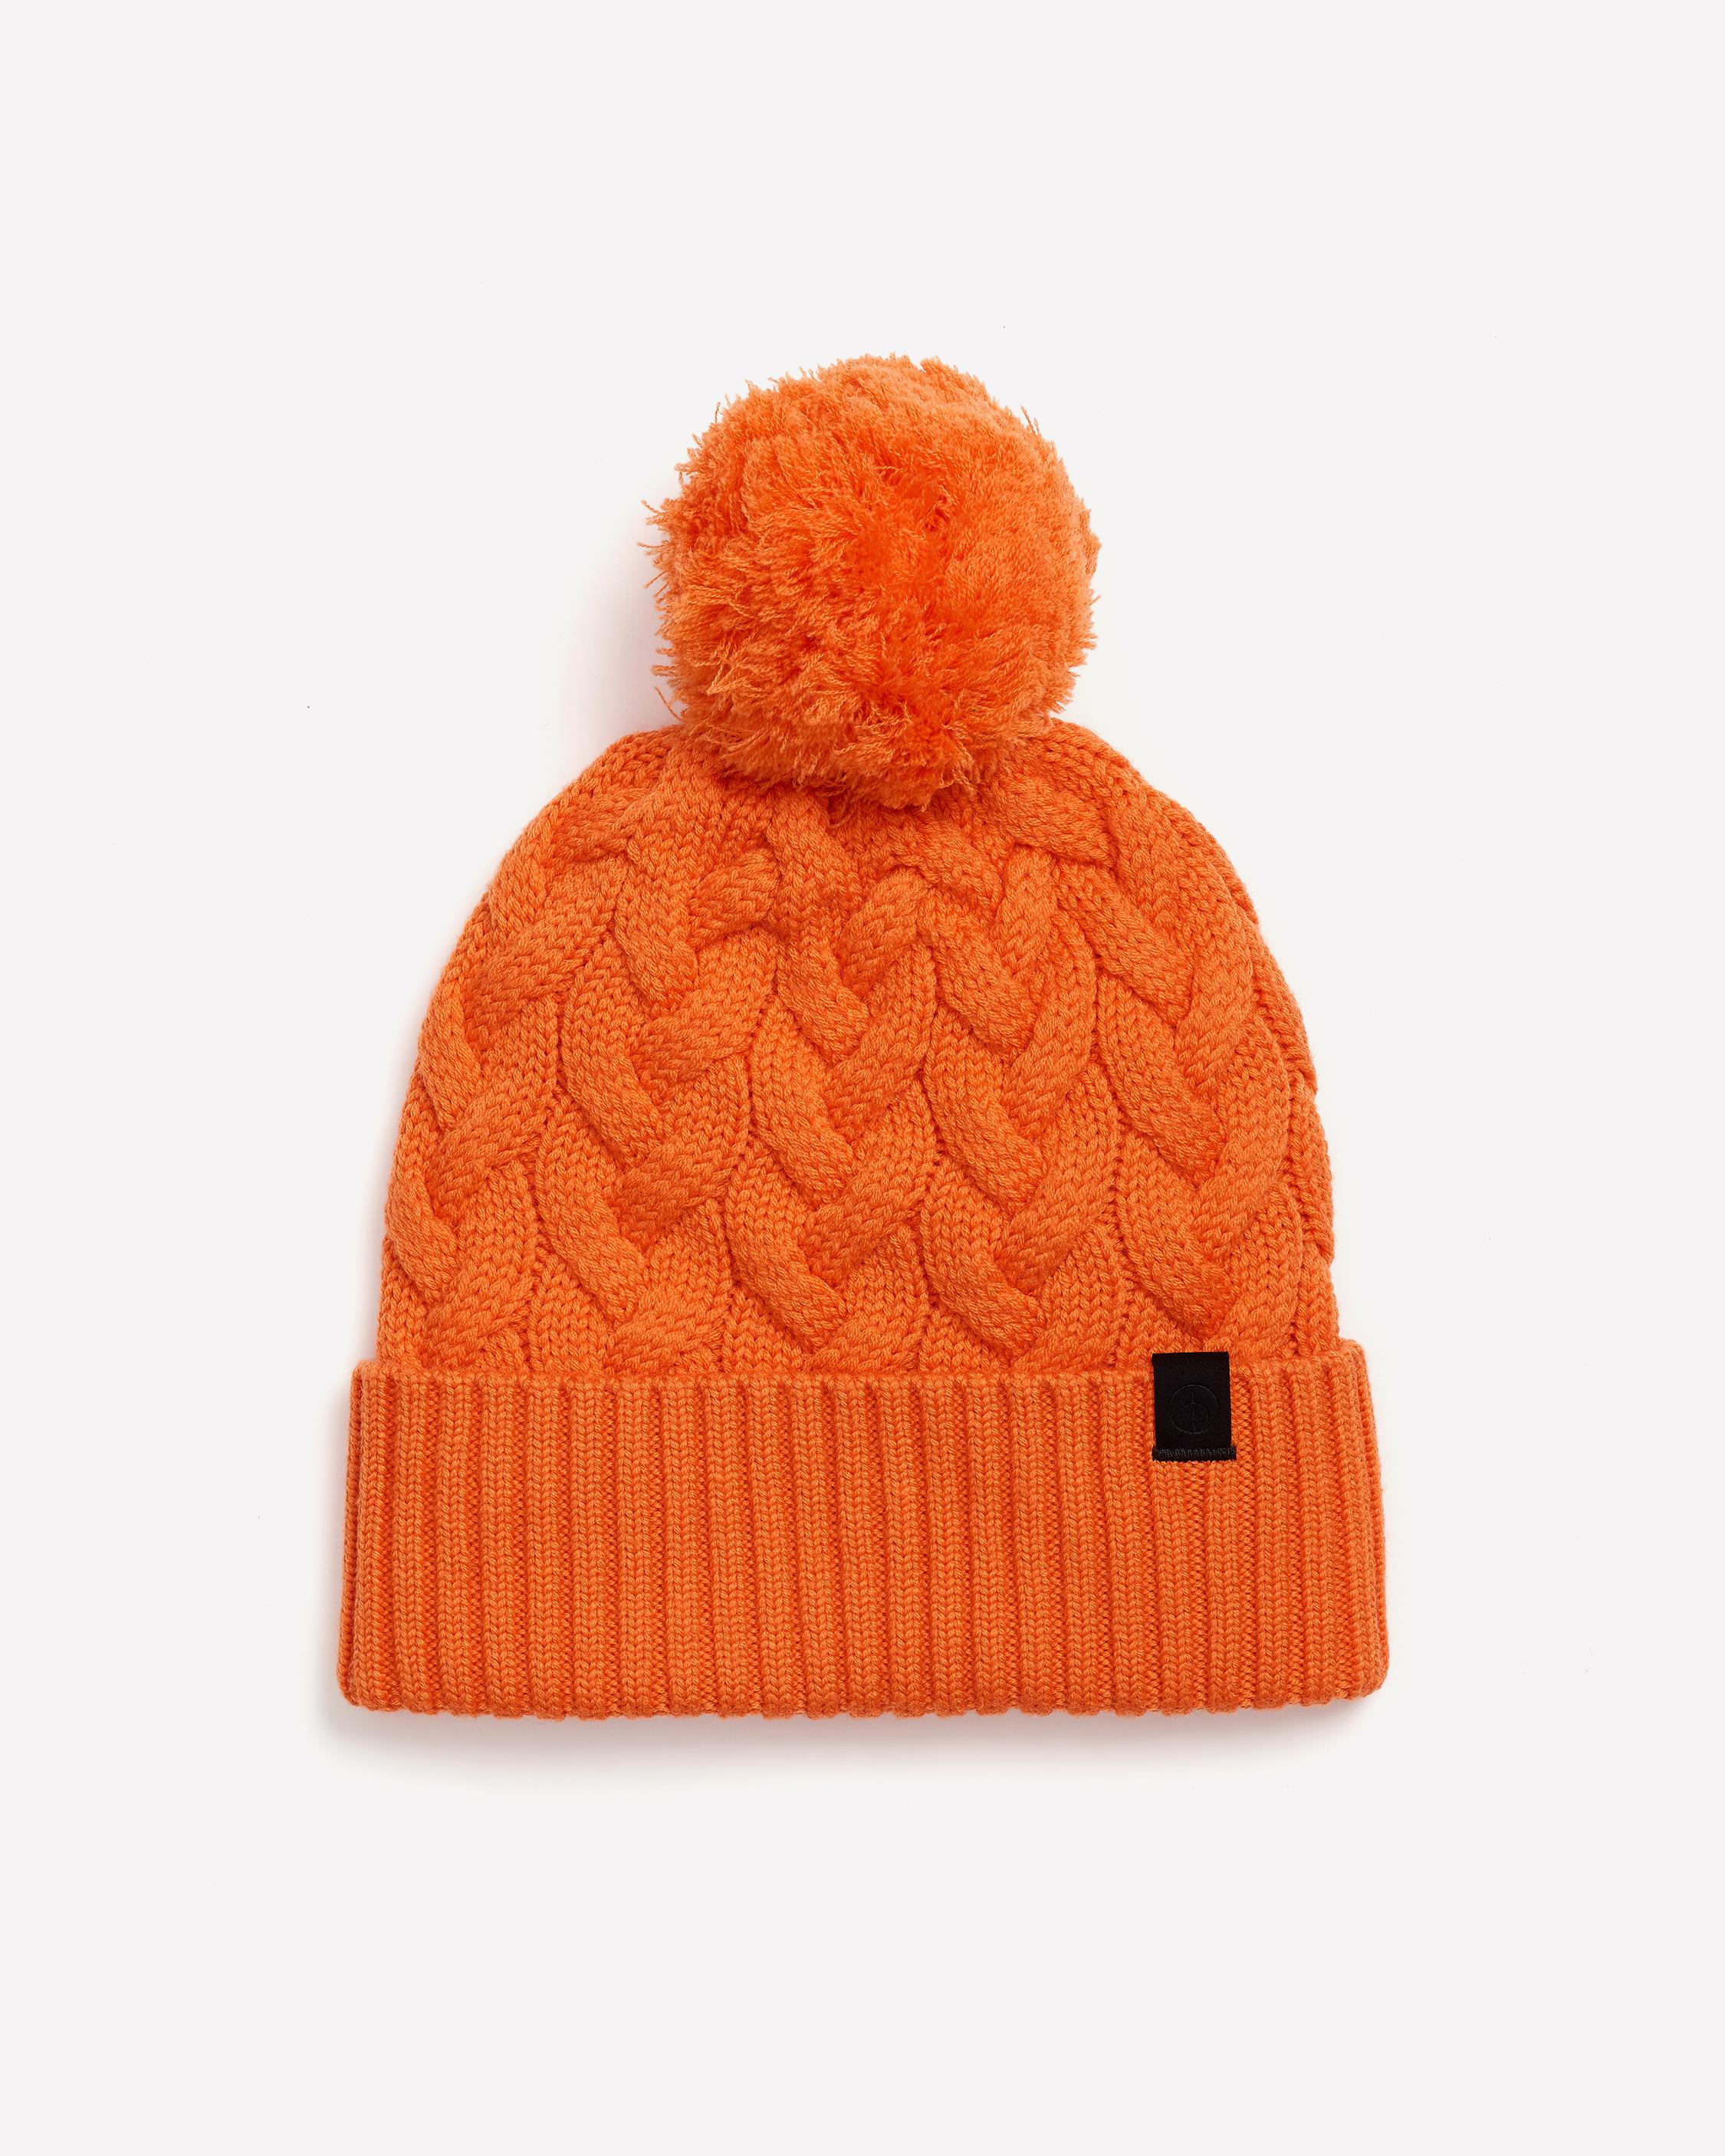 The Aran Cable Knit Beanie with Pompom 